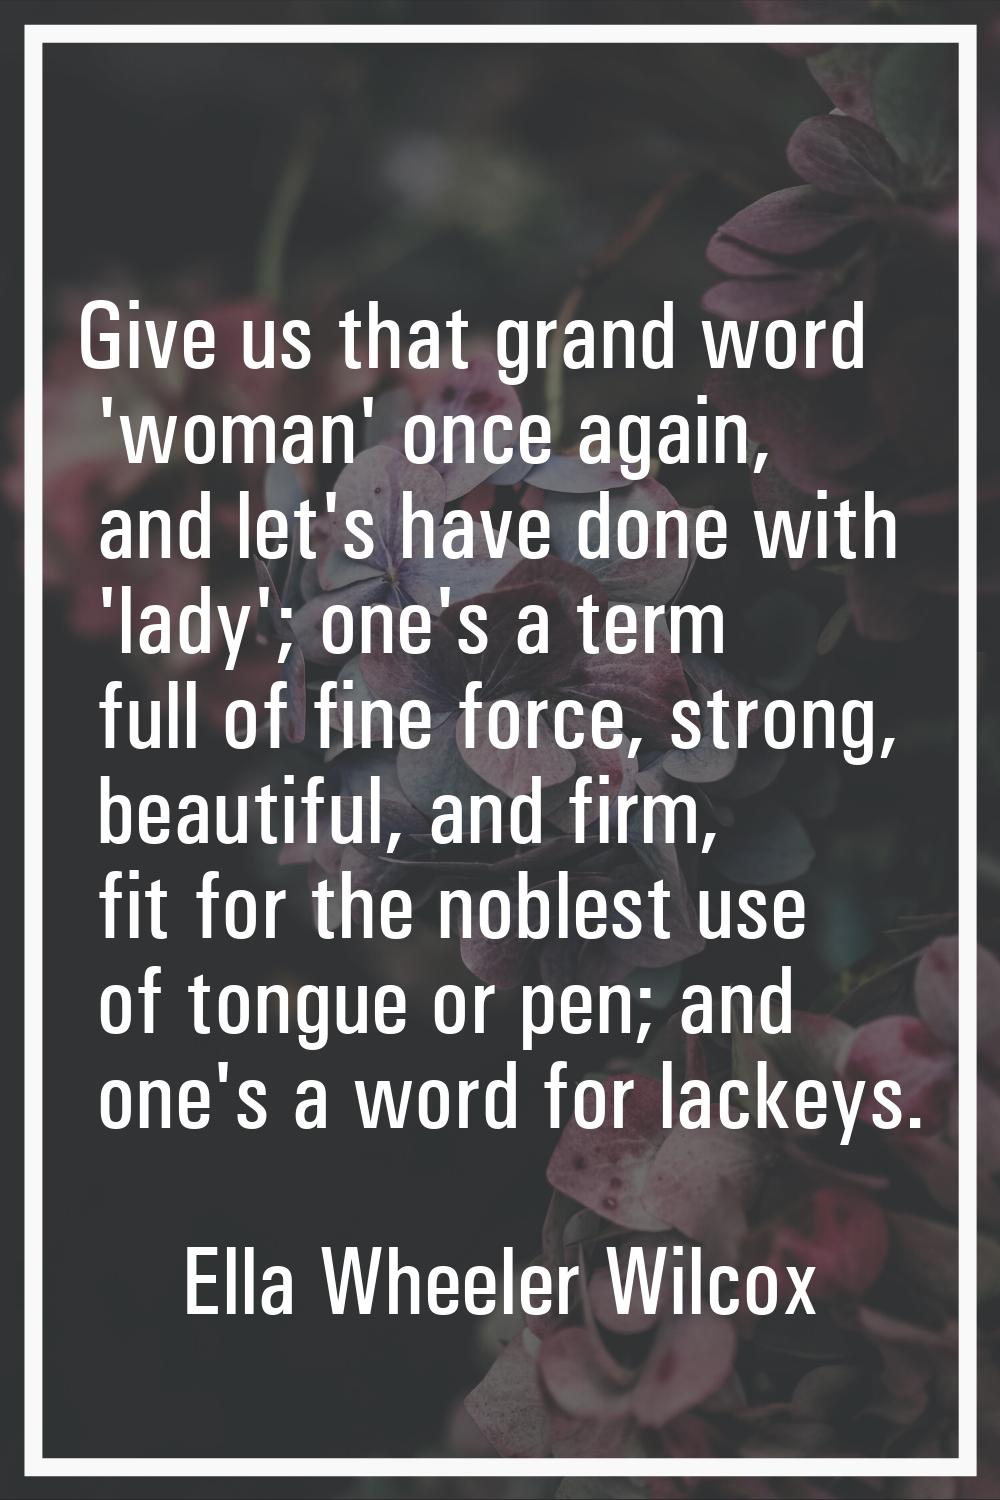 Give us that grand word 'woman' once again, and let's have done with 'lady'; one's a term full of f